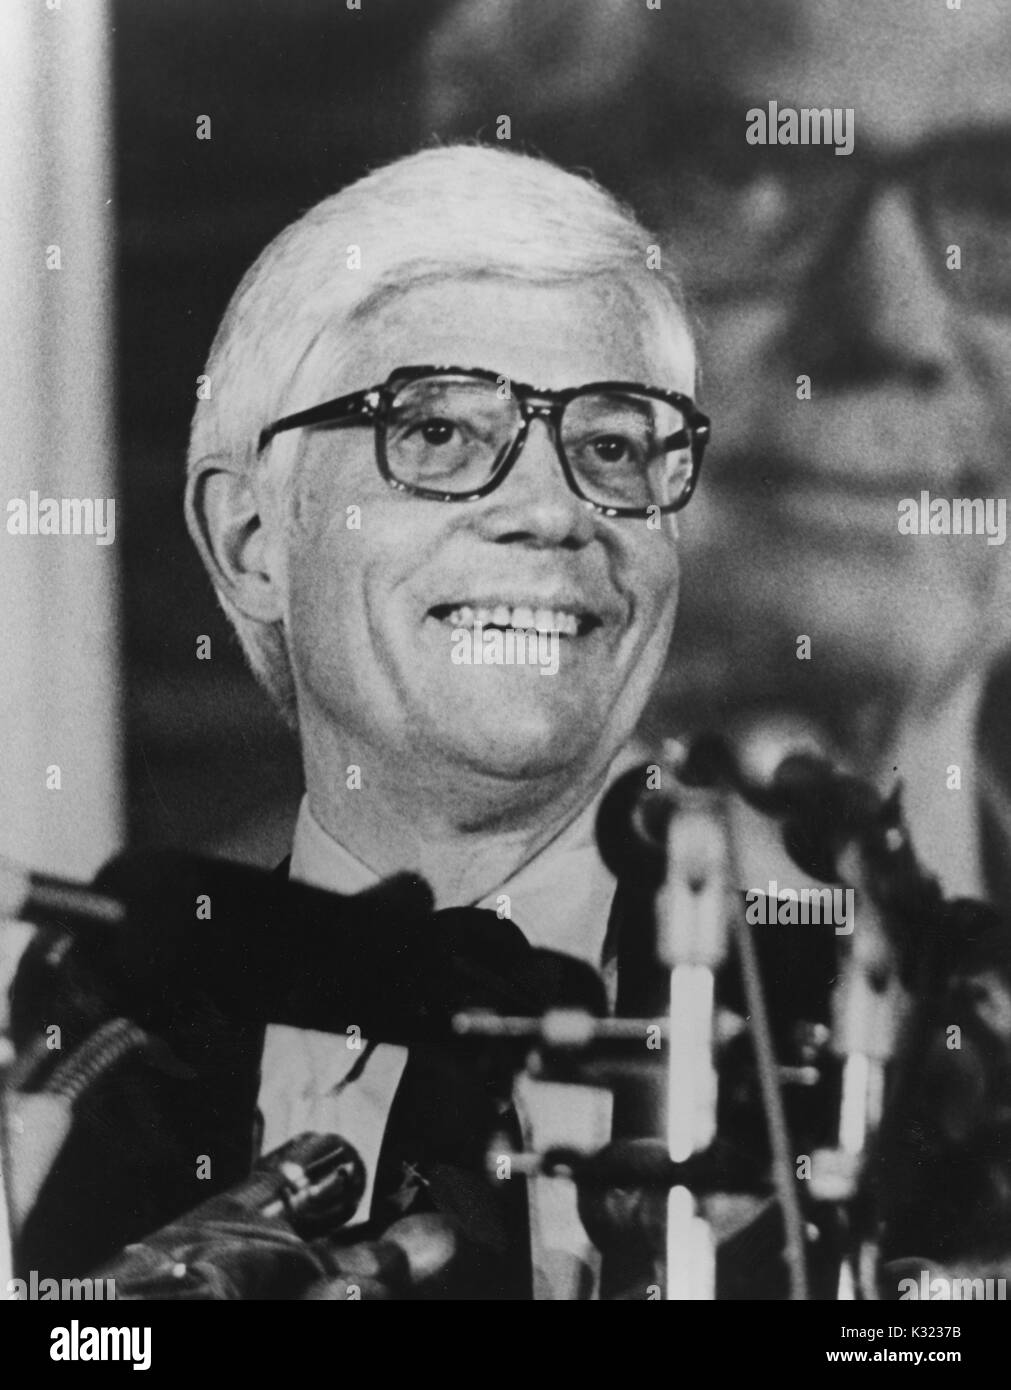 Grayscale portrait photograph, shoulders up, of US Representative John B Anderson of Illinois, smiling at a podium with numerous microphones in front of him, in attendance at the Milton S Eisenhower Symposium, a student-run annual speakers program at Johns Hopkins University, Baltimore, Maryland, 1980. Stock Photo